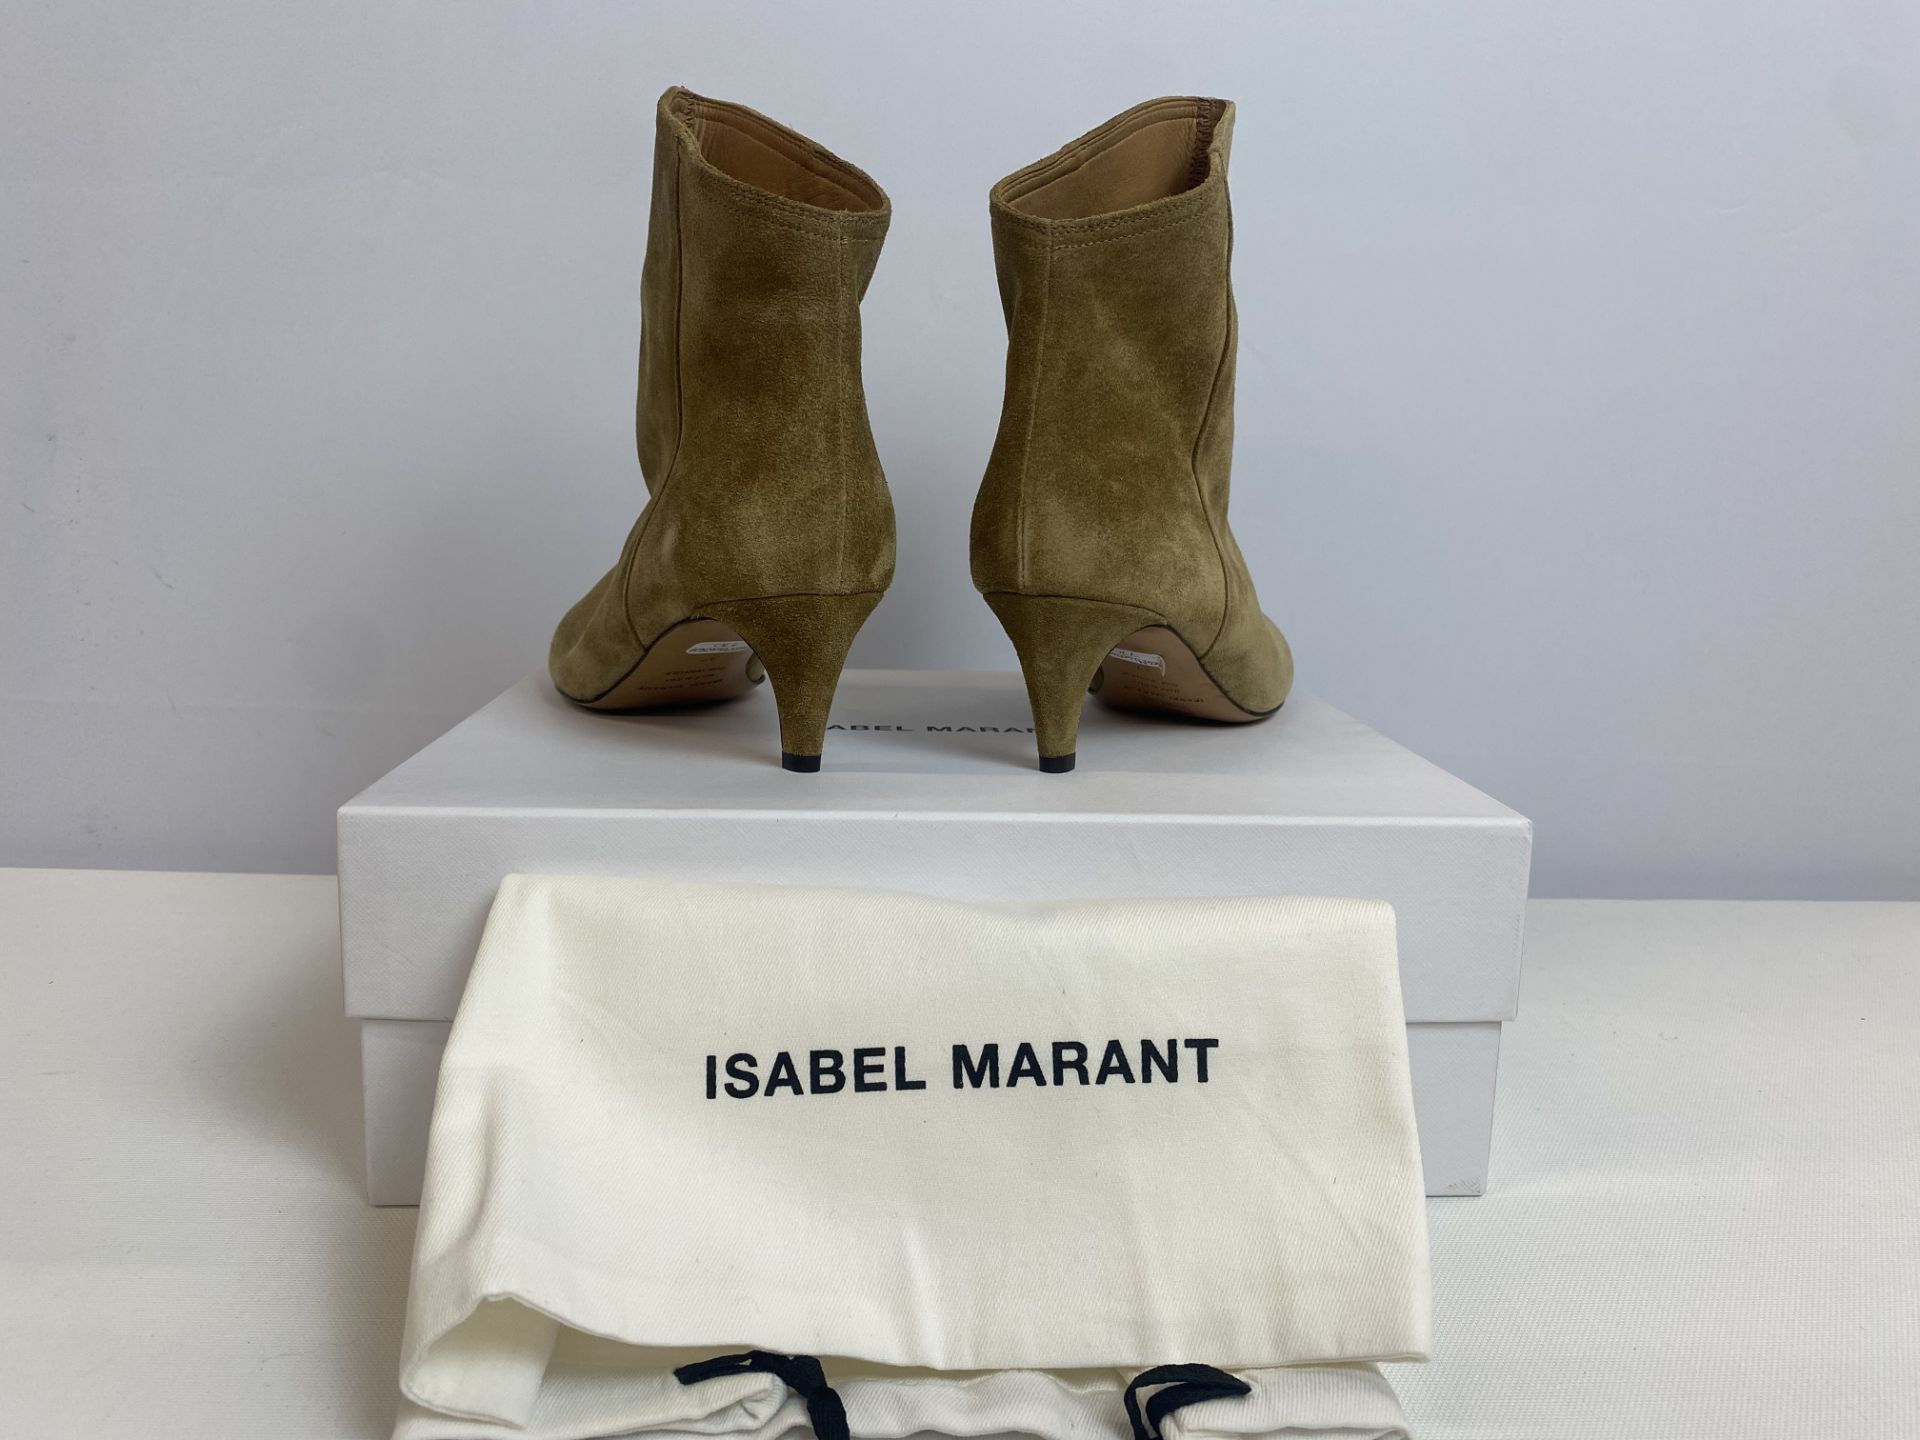 Isabel Marant Bootie dripi ANSUEDE CITY BOOT, Size: 37, Color: BEIGE, Retail Price: $770 - Image 4 of 4